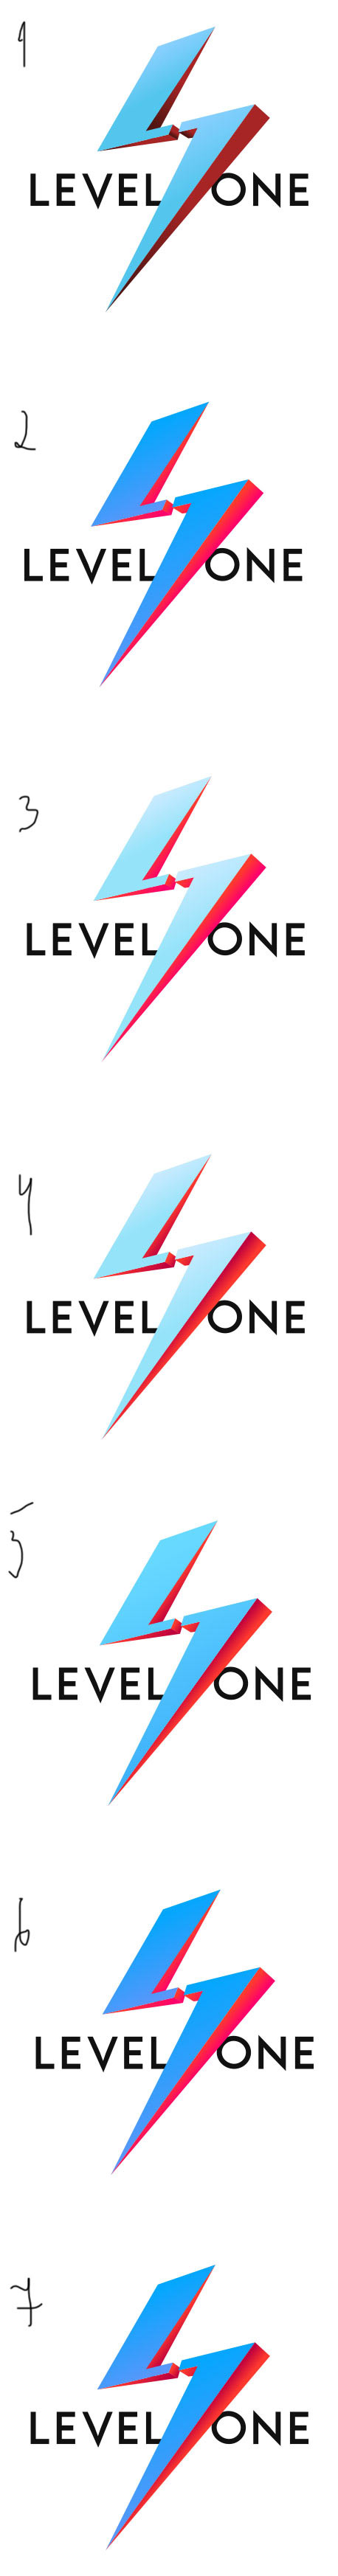 level one process 15